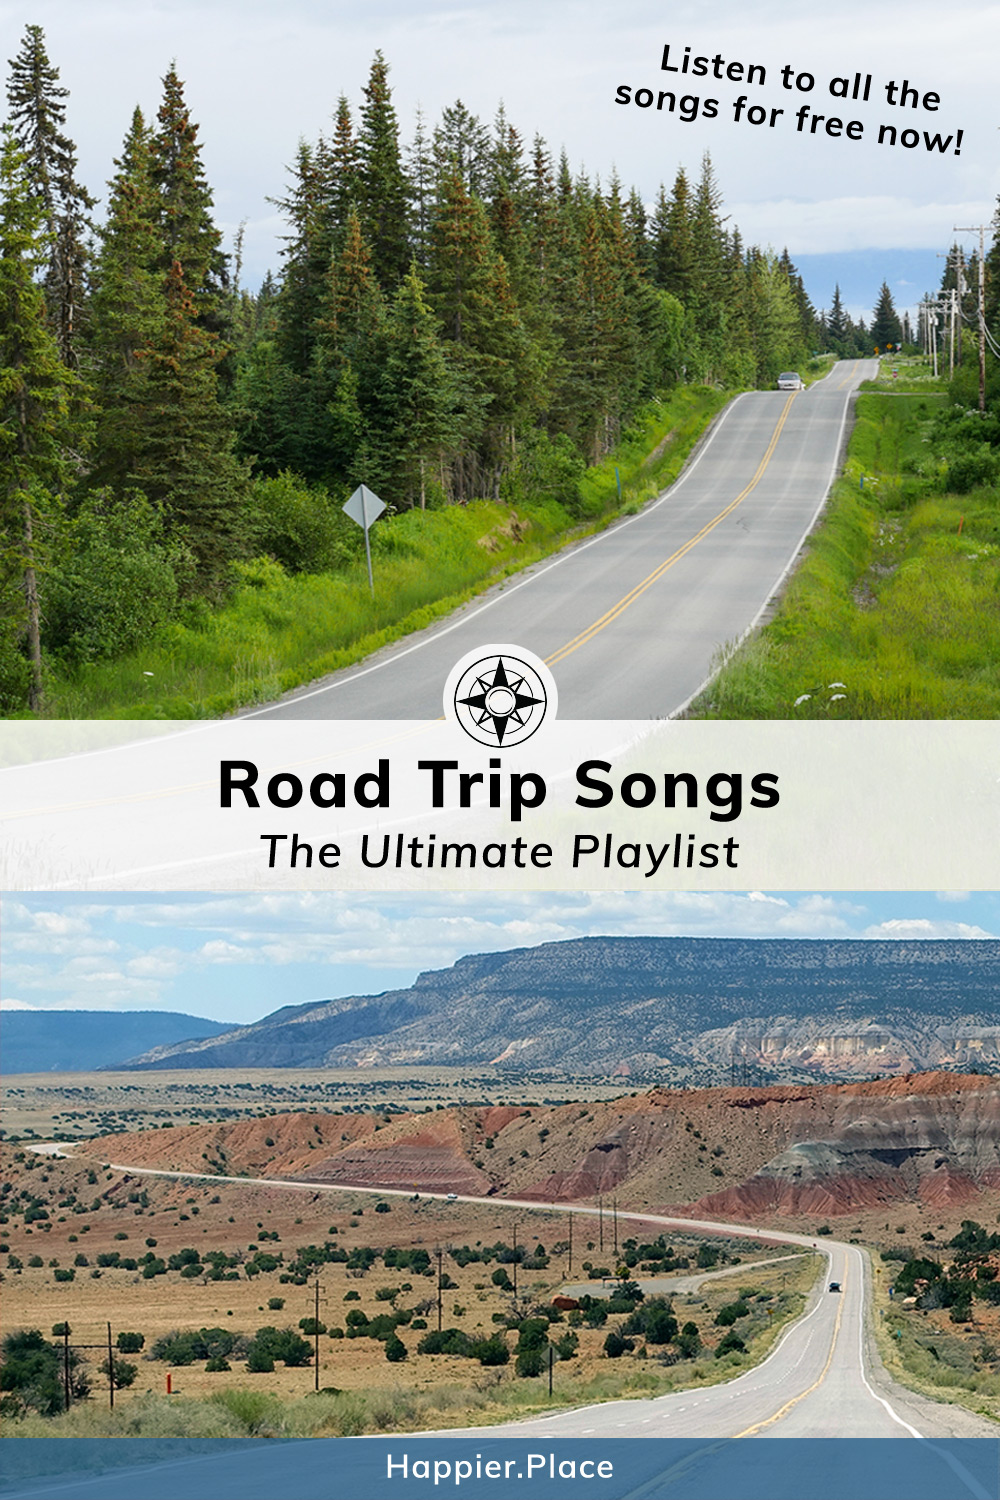 Road Trips Songs Playlist and views of highway in Alaska and New Mexico